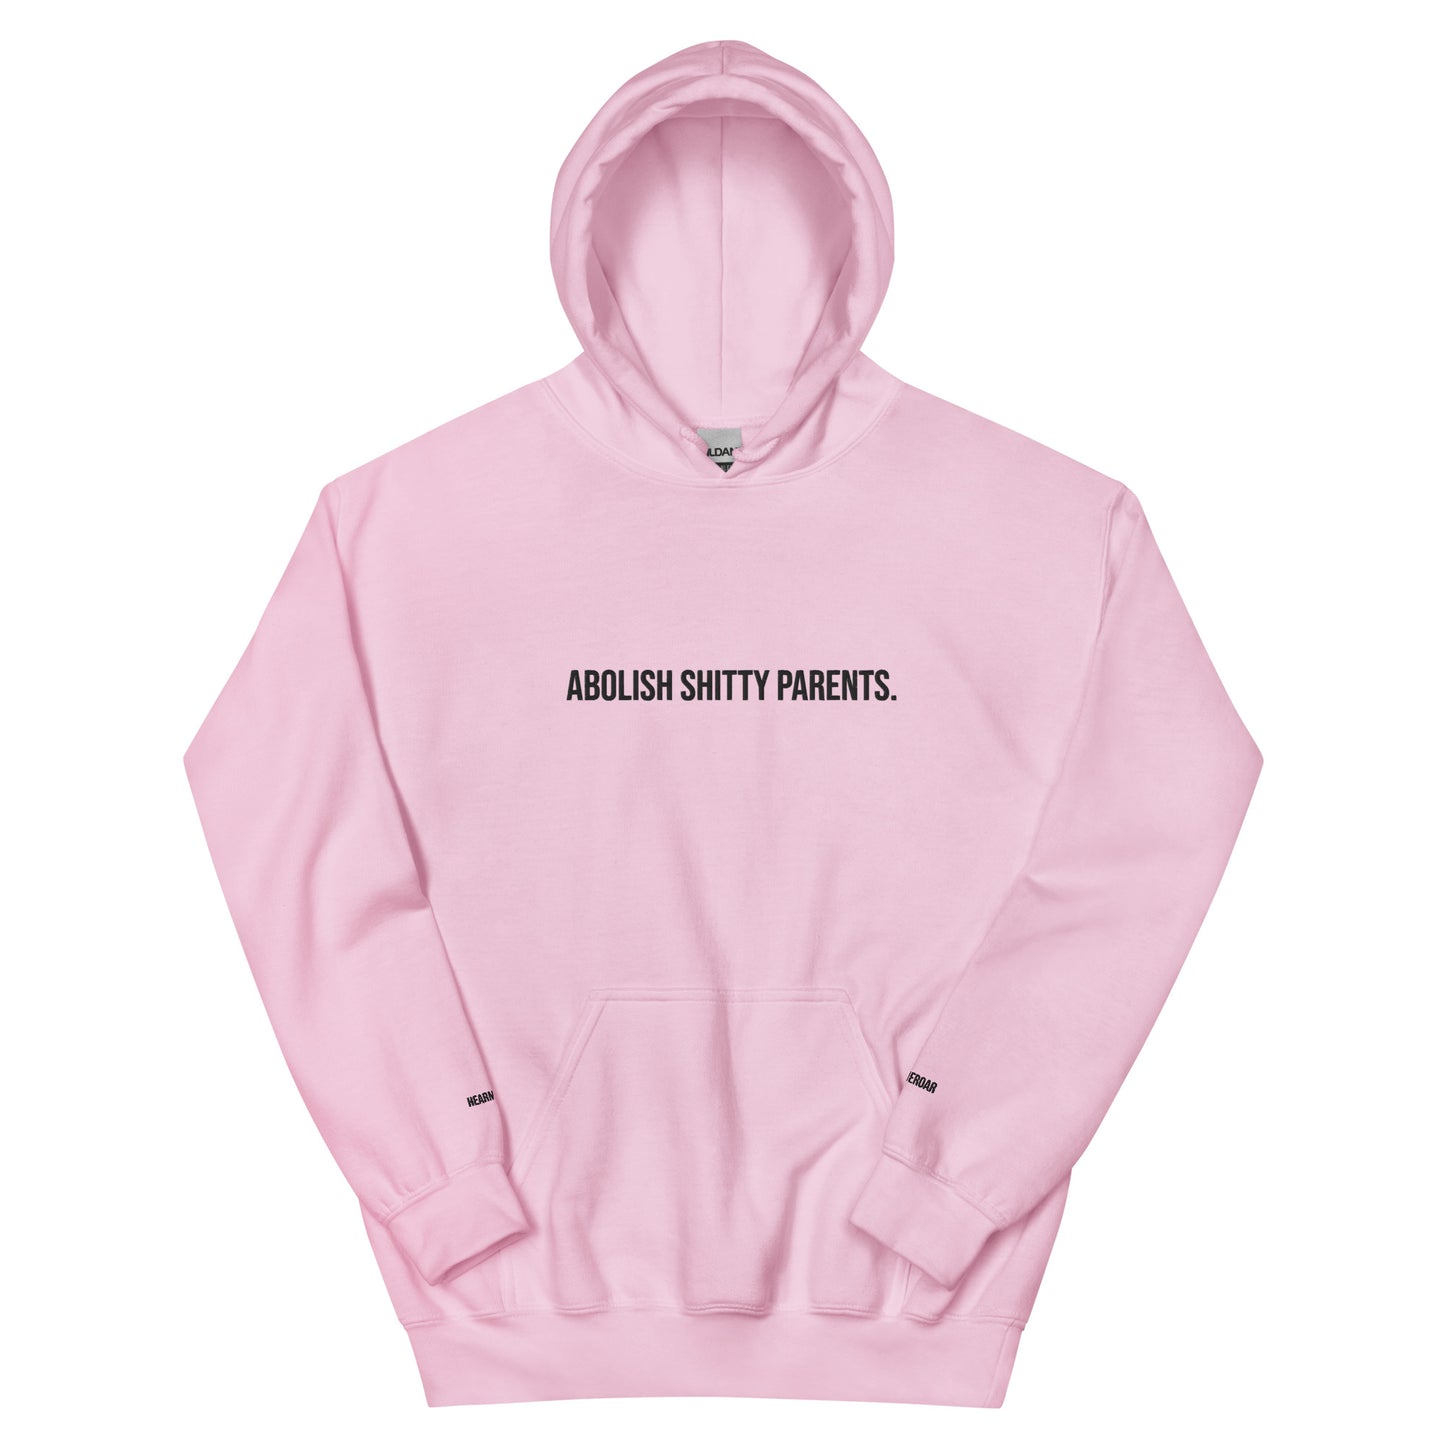 Embroidered Abolish Shitty Parents Unisex Hoodie